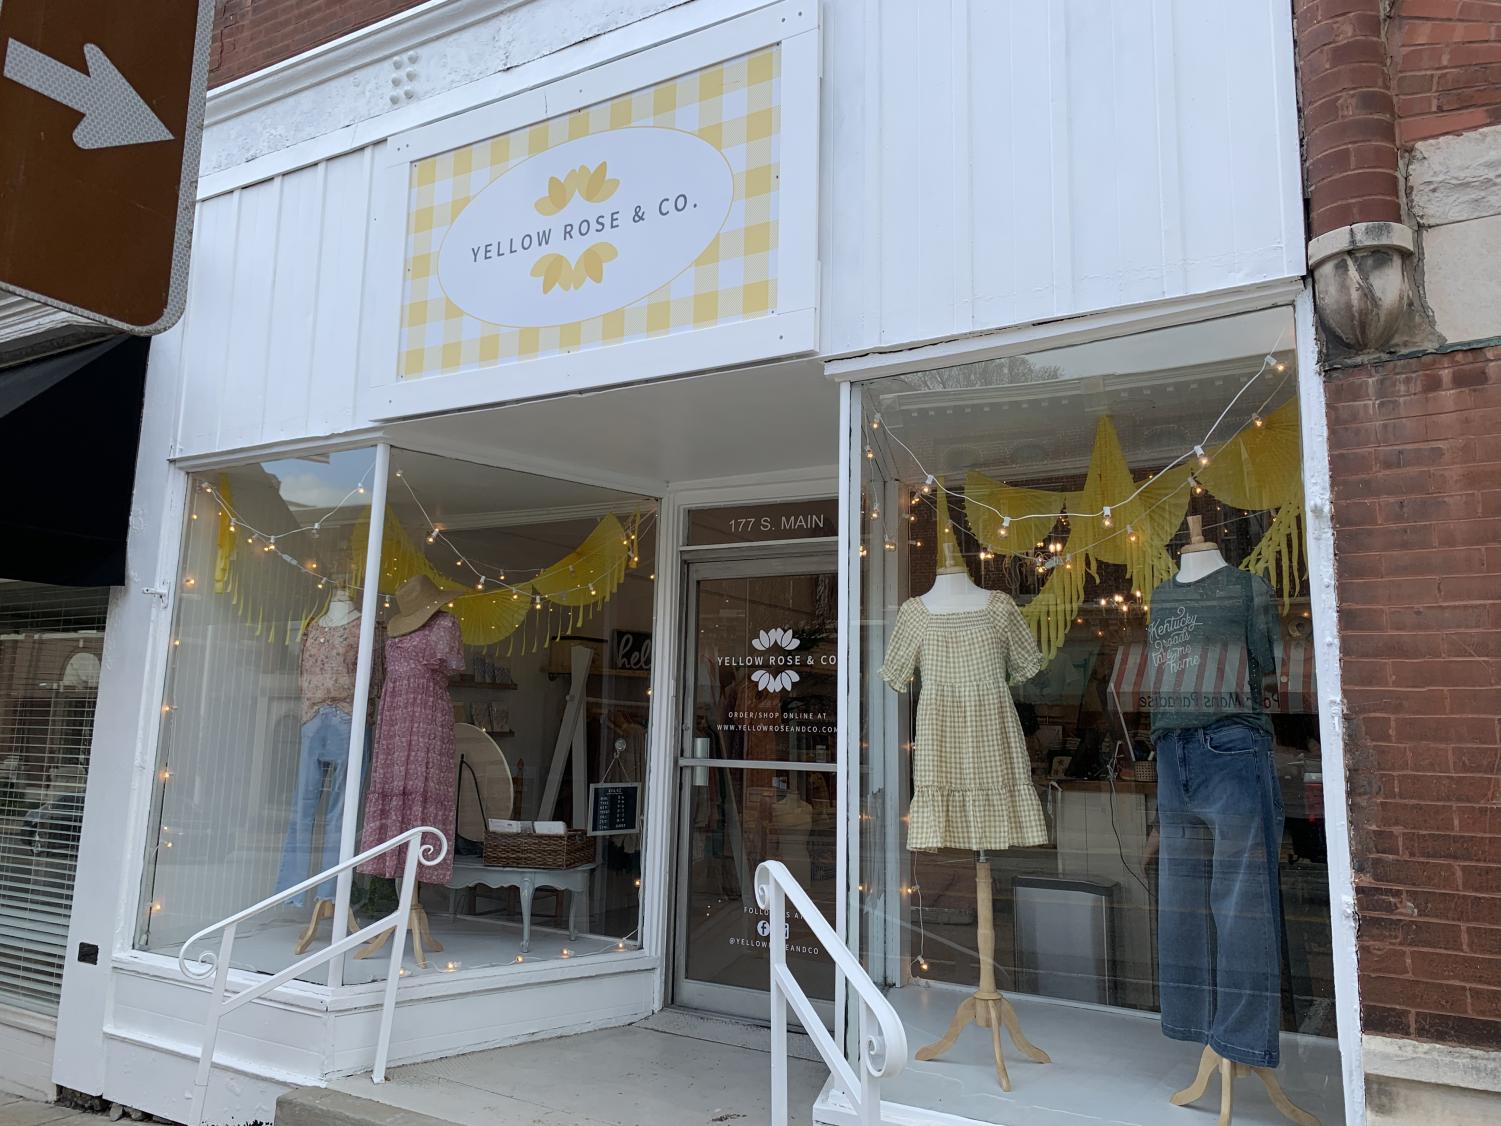 Two+New+Shops+in+Downtown+Versailles+That+You+Should+Check+Out